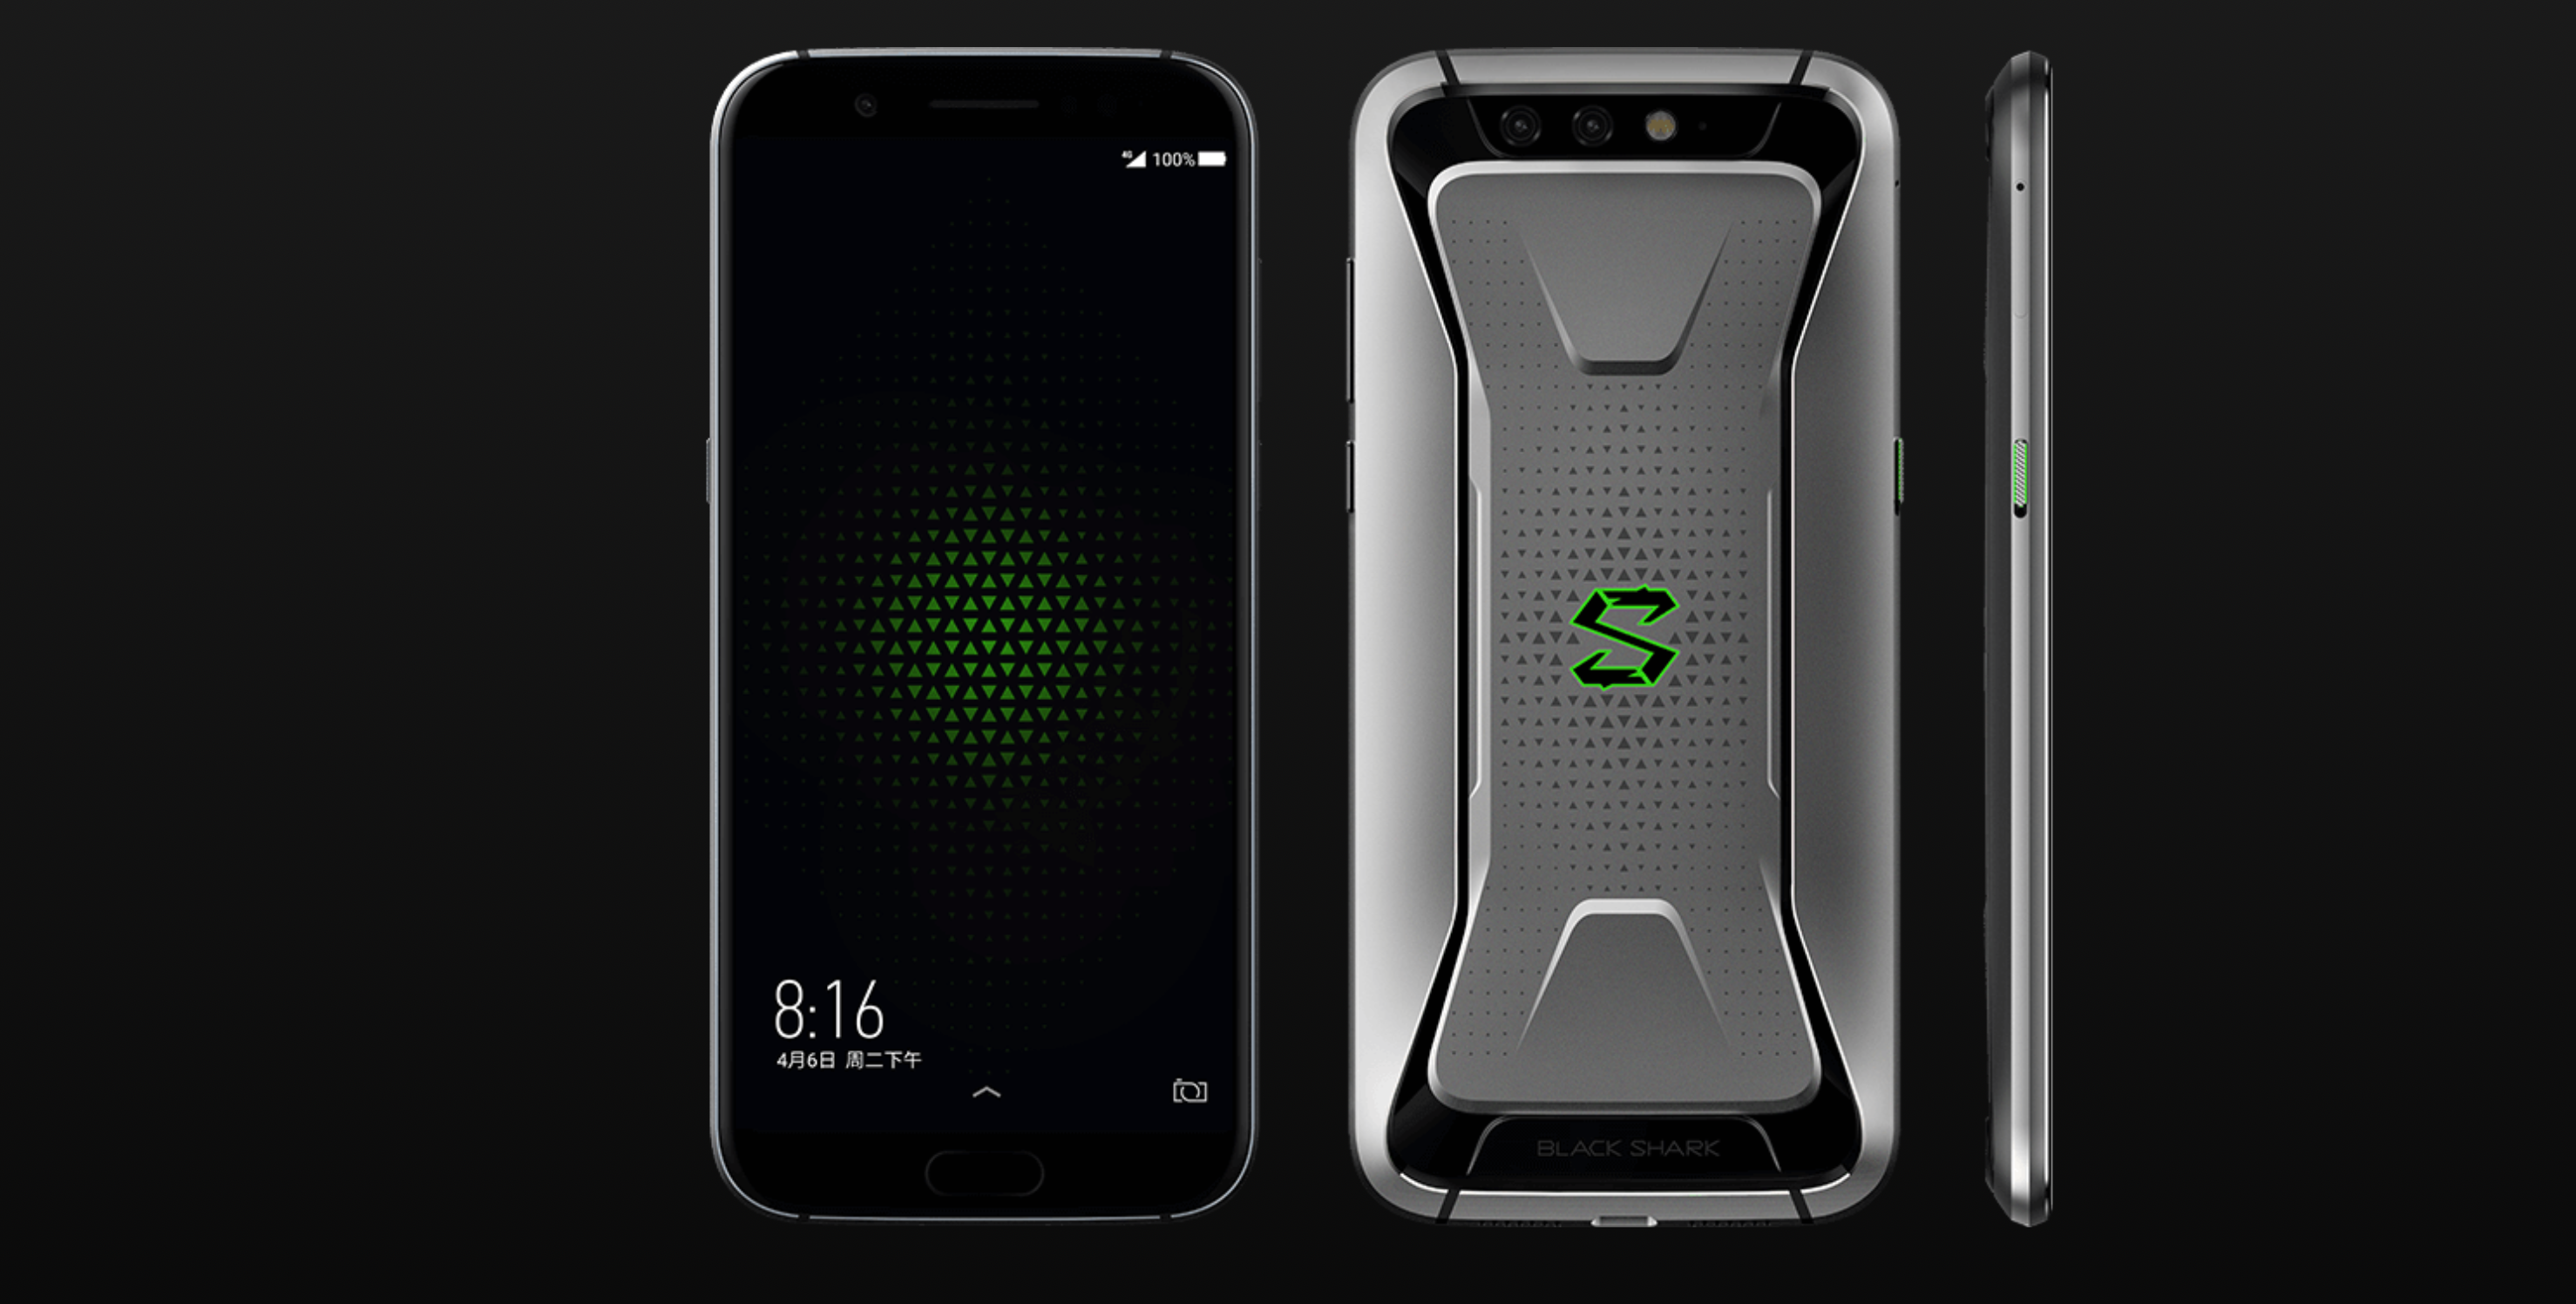 Xiaomi Black Shark Gaming Phone Launched, Price, Specs | iGyaan